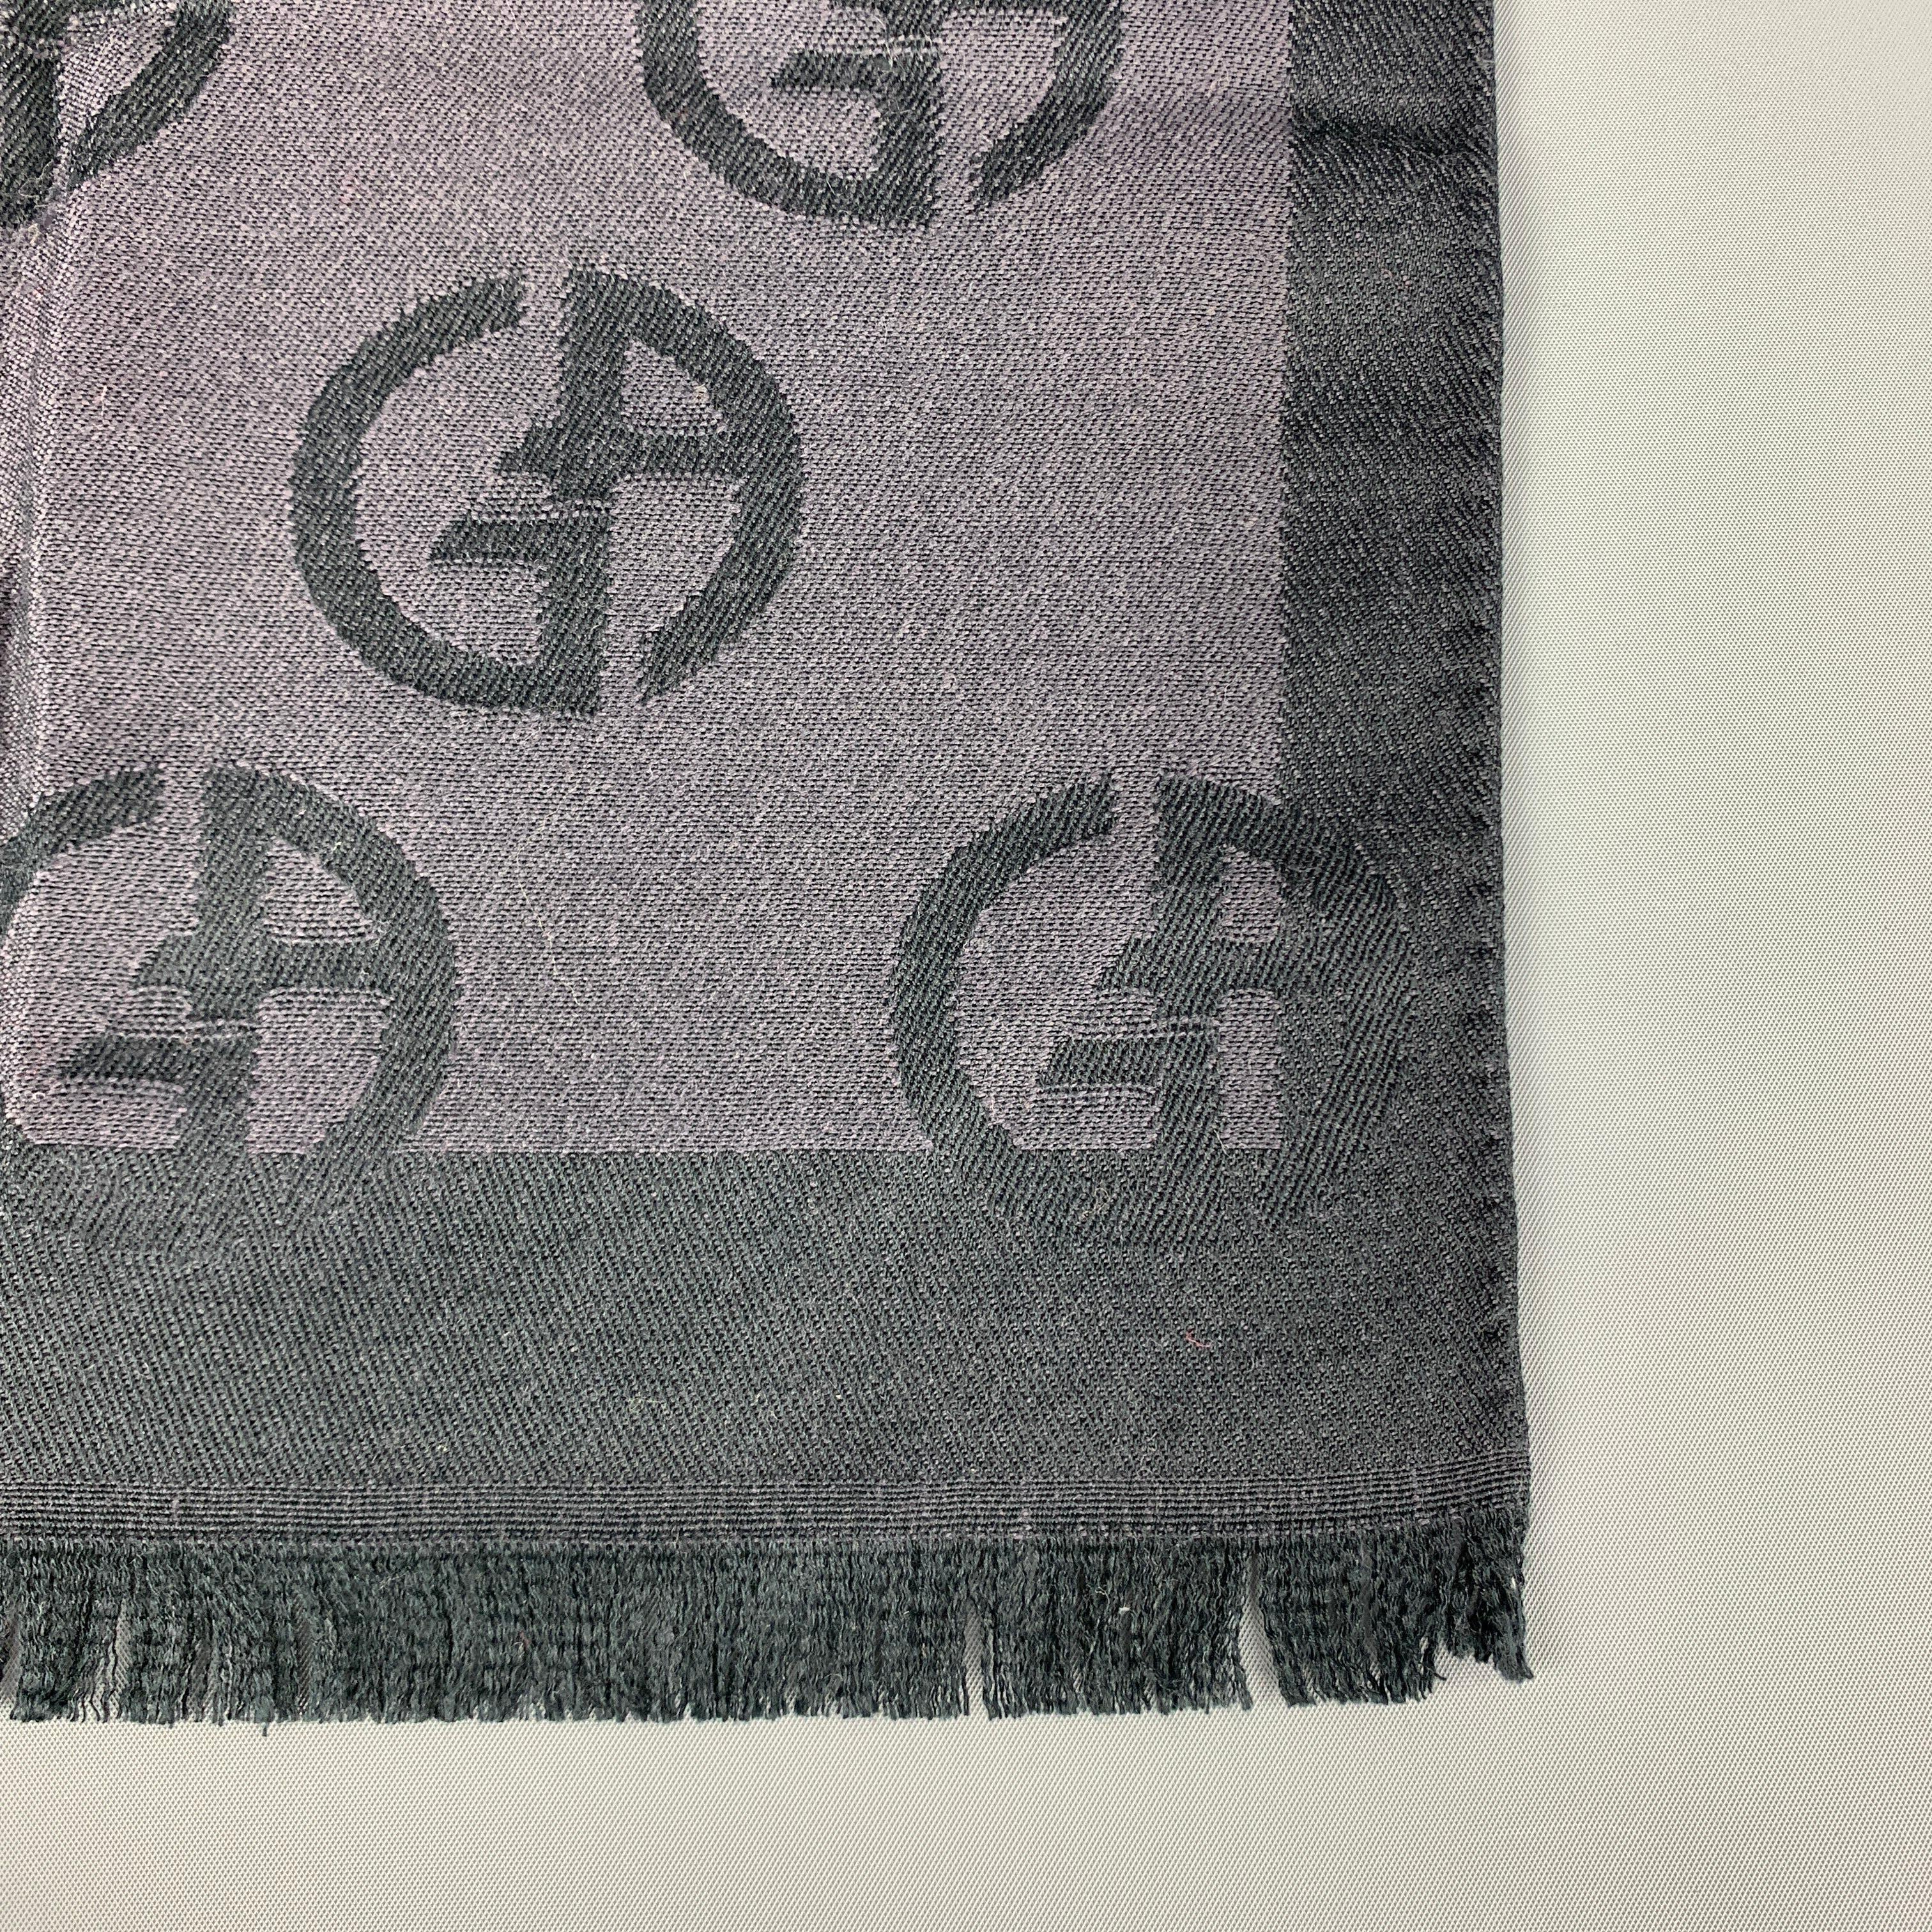 GIORGIO ARMANI Scarf comes in charcoal tones in silk / wool material, with woven monogram throughout and fringe. Made in Italy.
 
Excellent Pre-Owned Condition.
 
70 x 15 in.